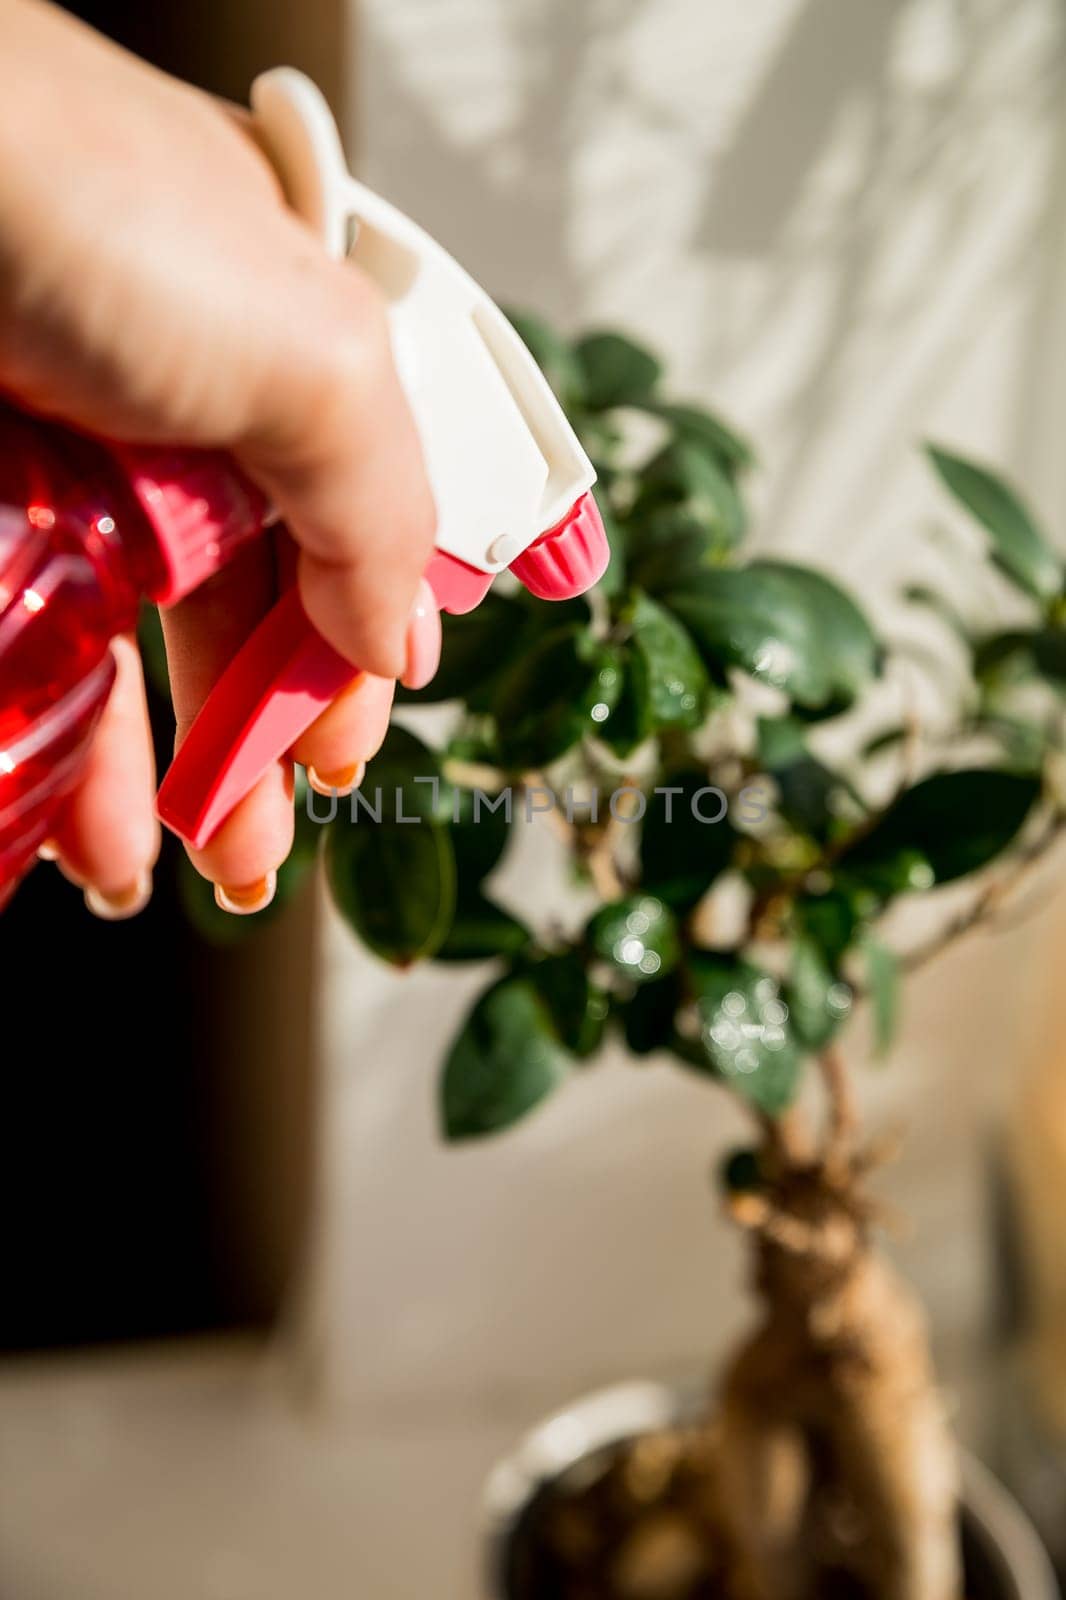 Hand spraying houseplants with a spray bottle.Plant and water spray beside window splashed by sunlight, indoor gardening. Hand spraying the plant on sunny day. Hydration of plants, washing of plant leaves by YuliaYaspe1979